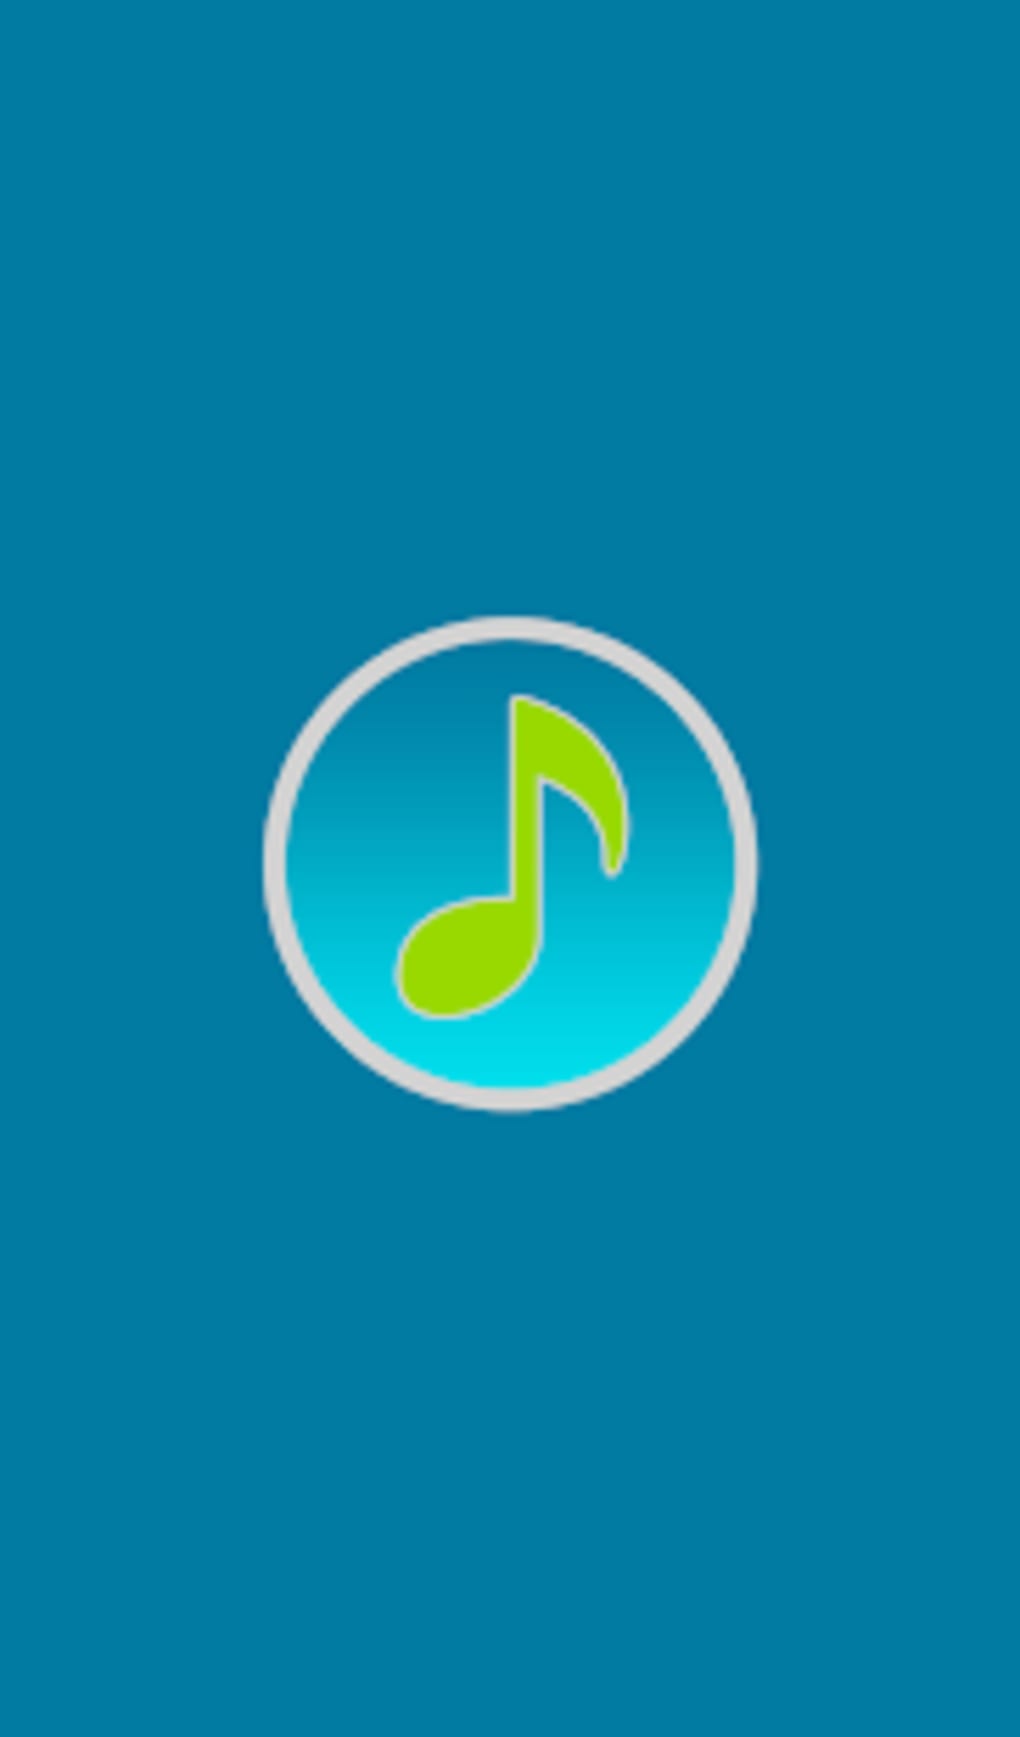 mp3 juice download music free download for android mobile